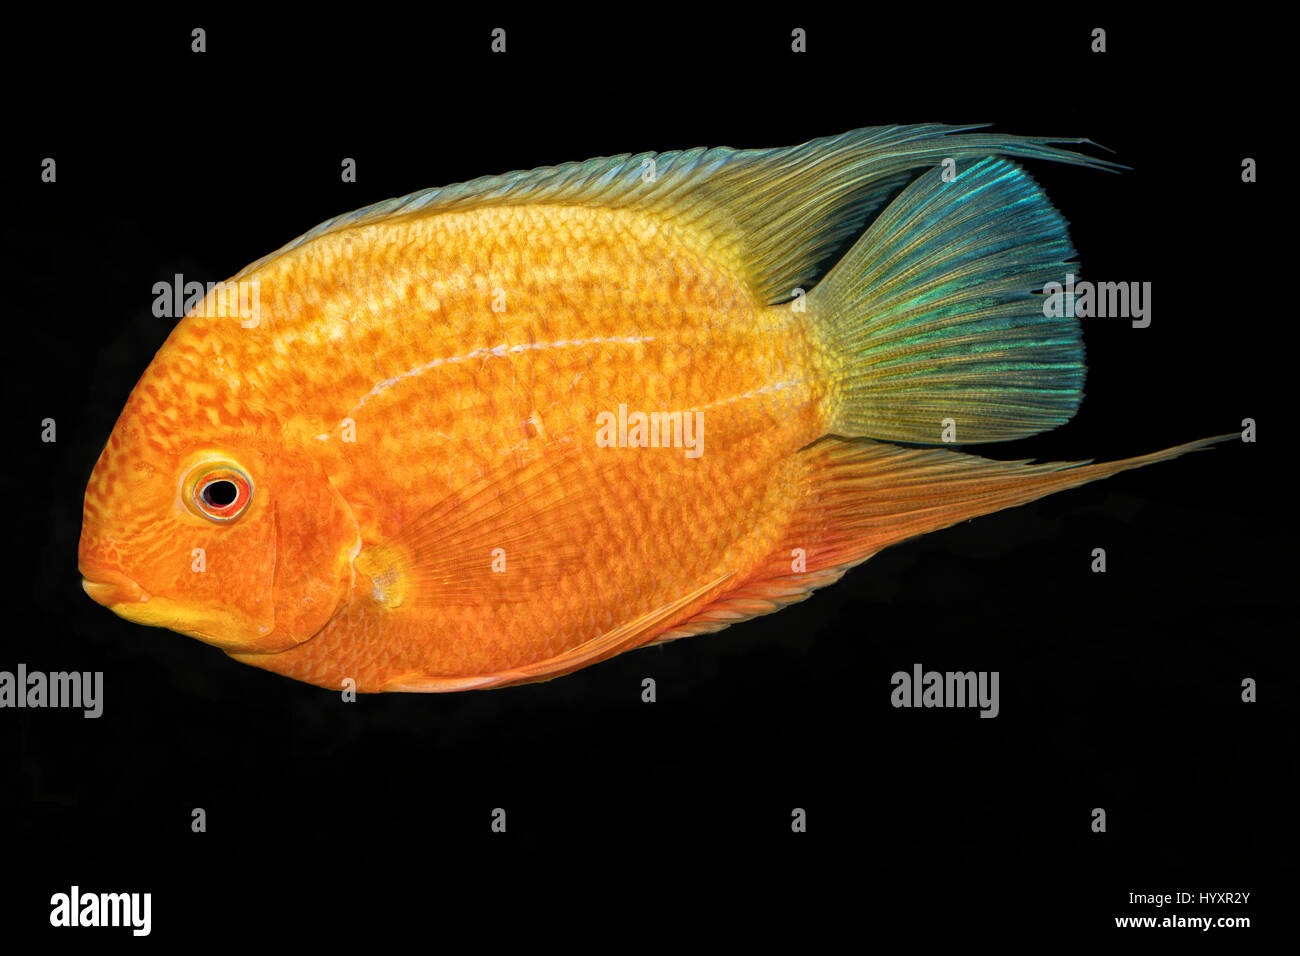 Cichlid fish (Heros sp.) isolated on a black background Stock Photo